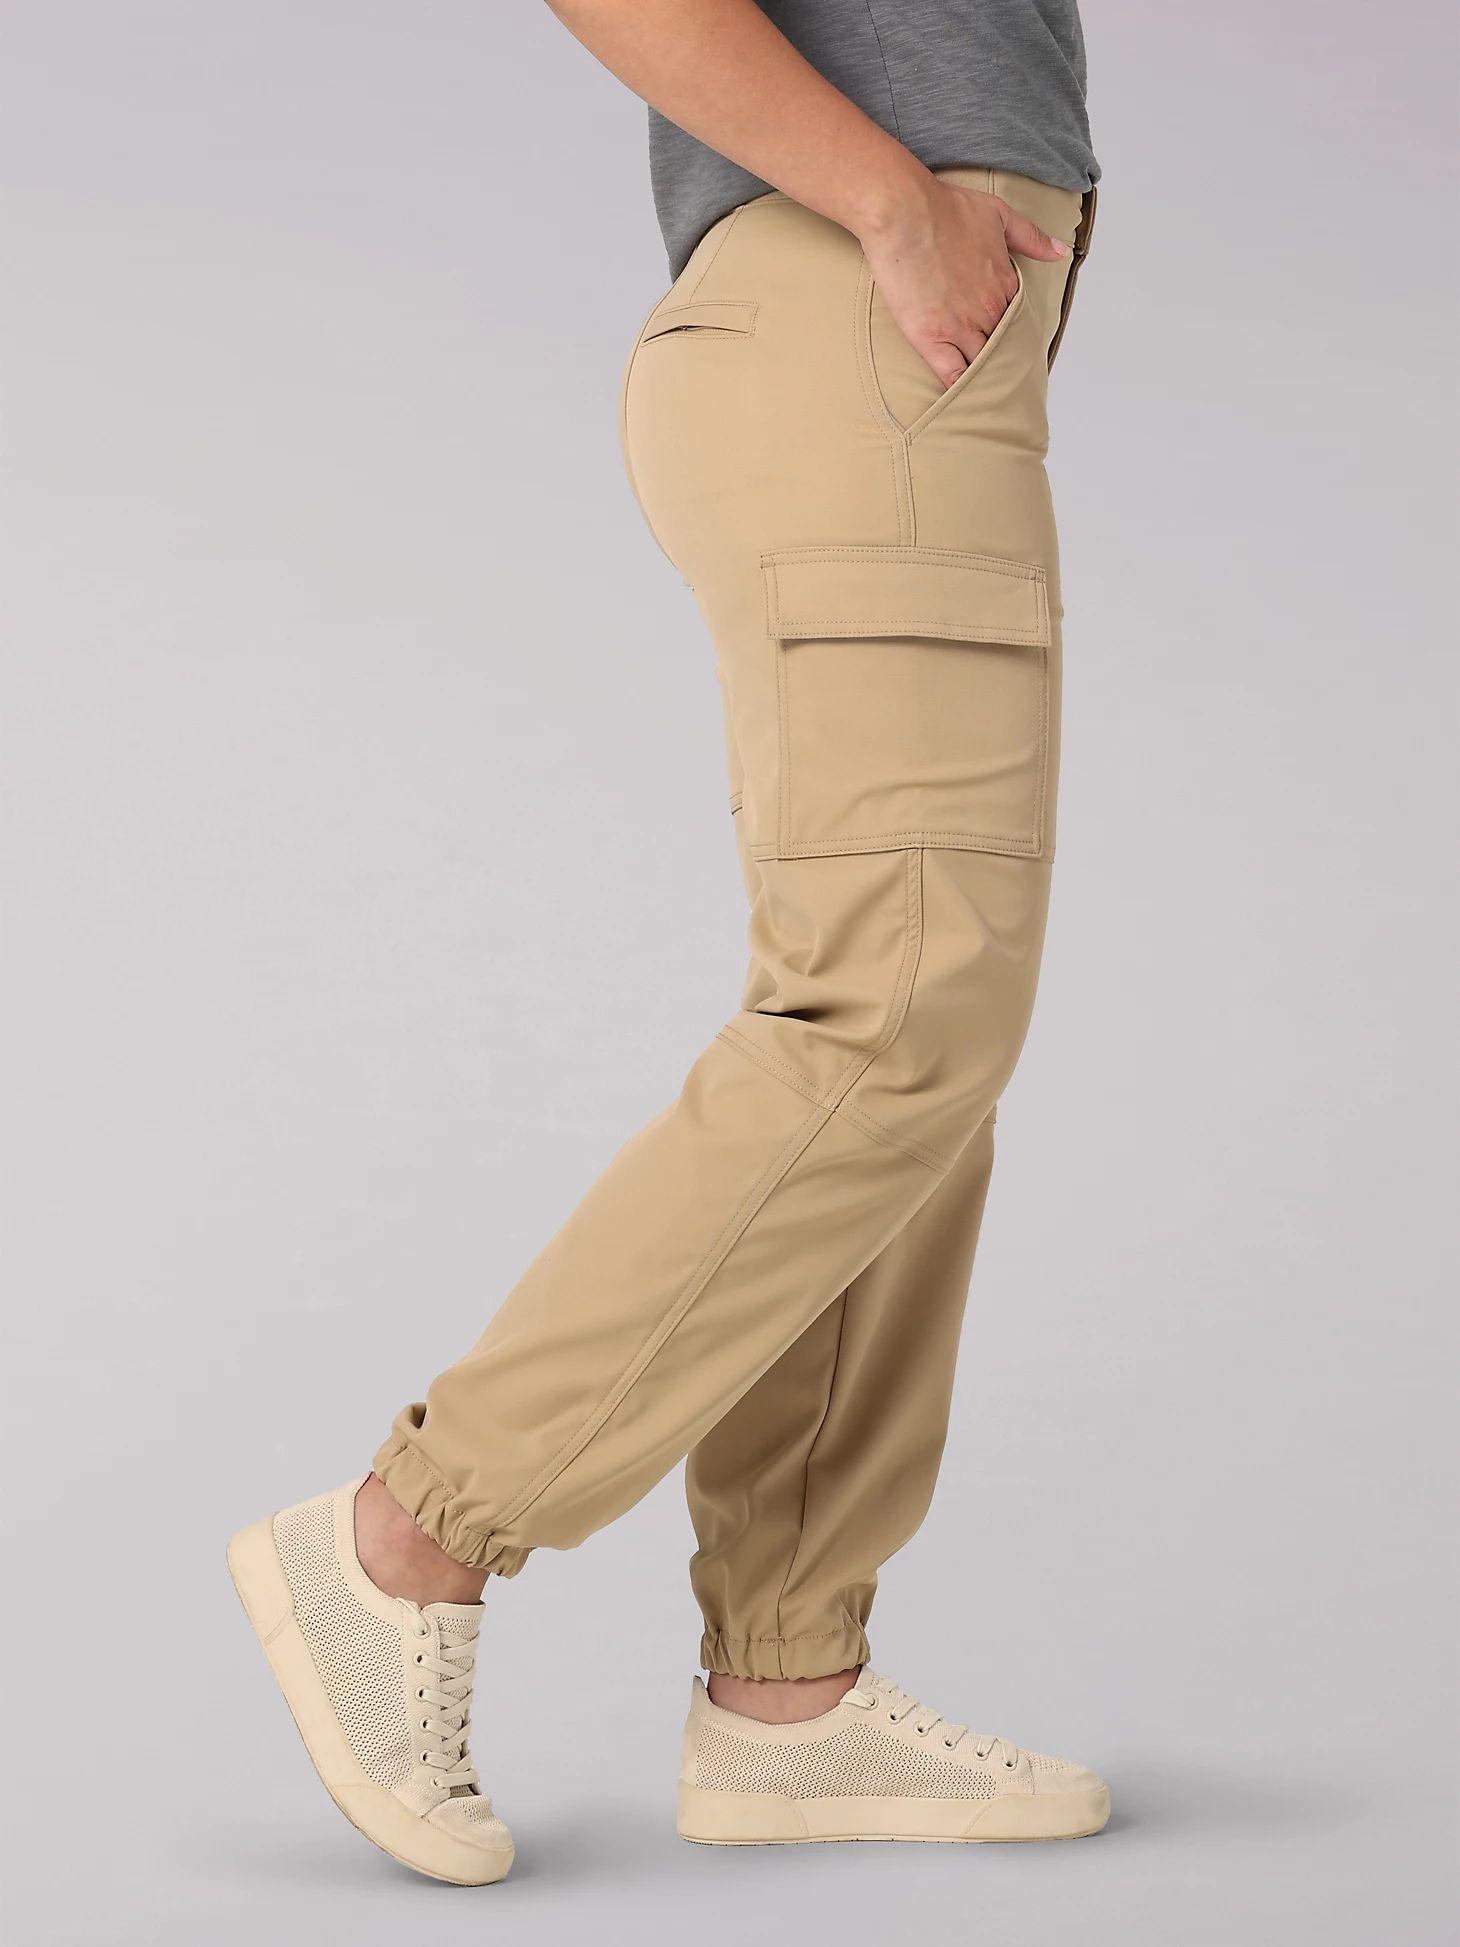 Women's Ultra Lux with Flex-to-Go Single Pocket Cargo Jogger Pant  in Sand | Lee Jeans